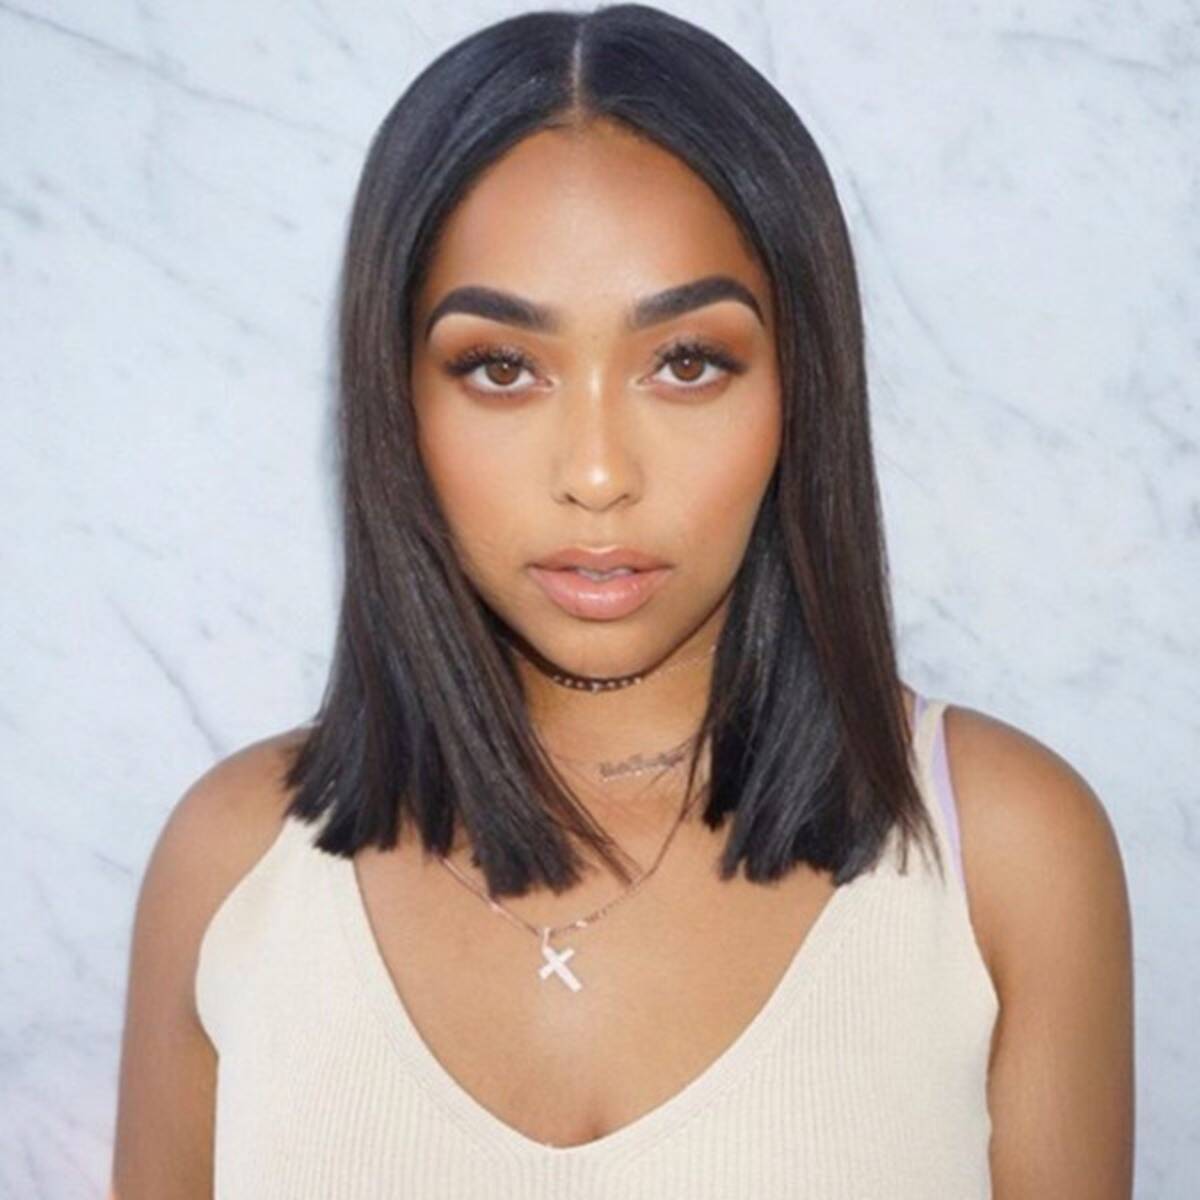 Jordyn Woods Sparks Skin Bleaching Rumours And Fans Are Not Happy - See The Pics That Triggered The Talk